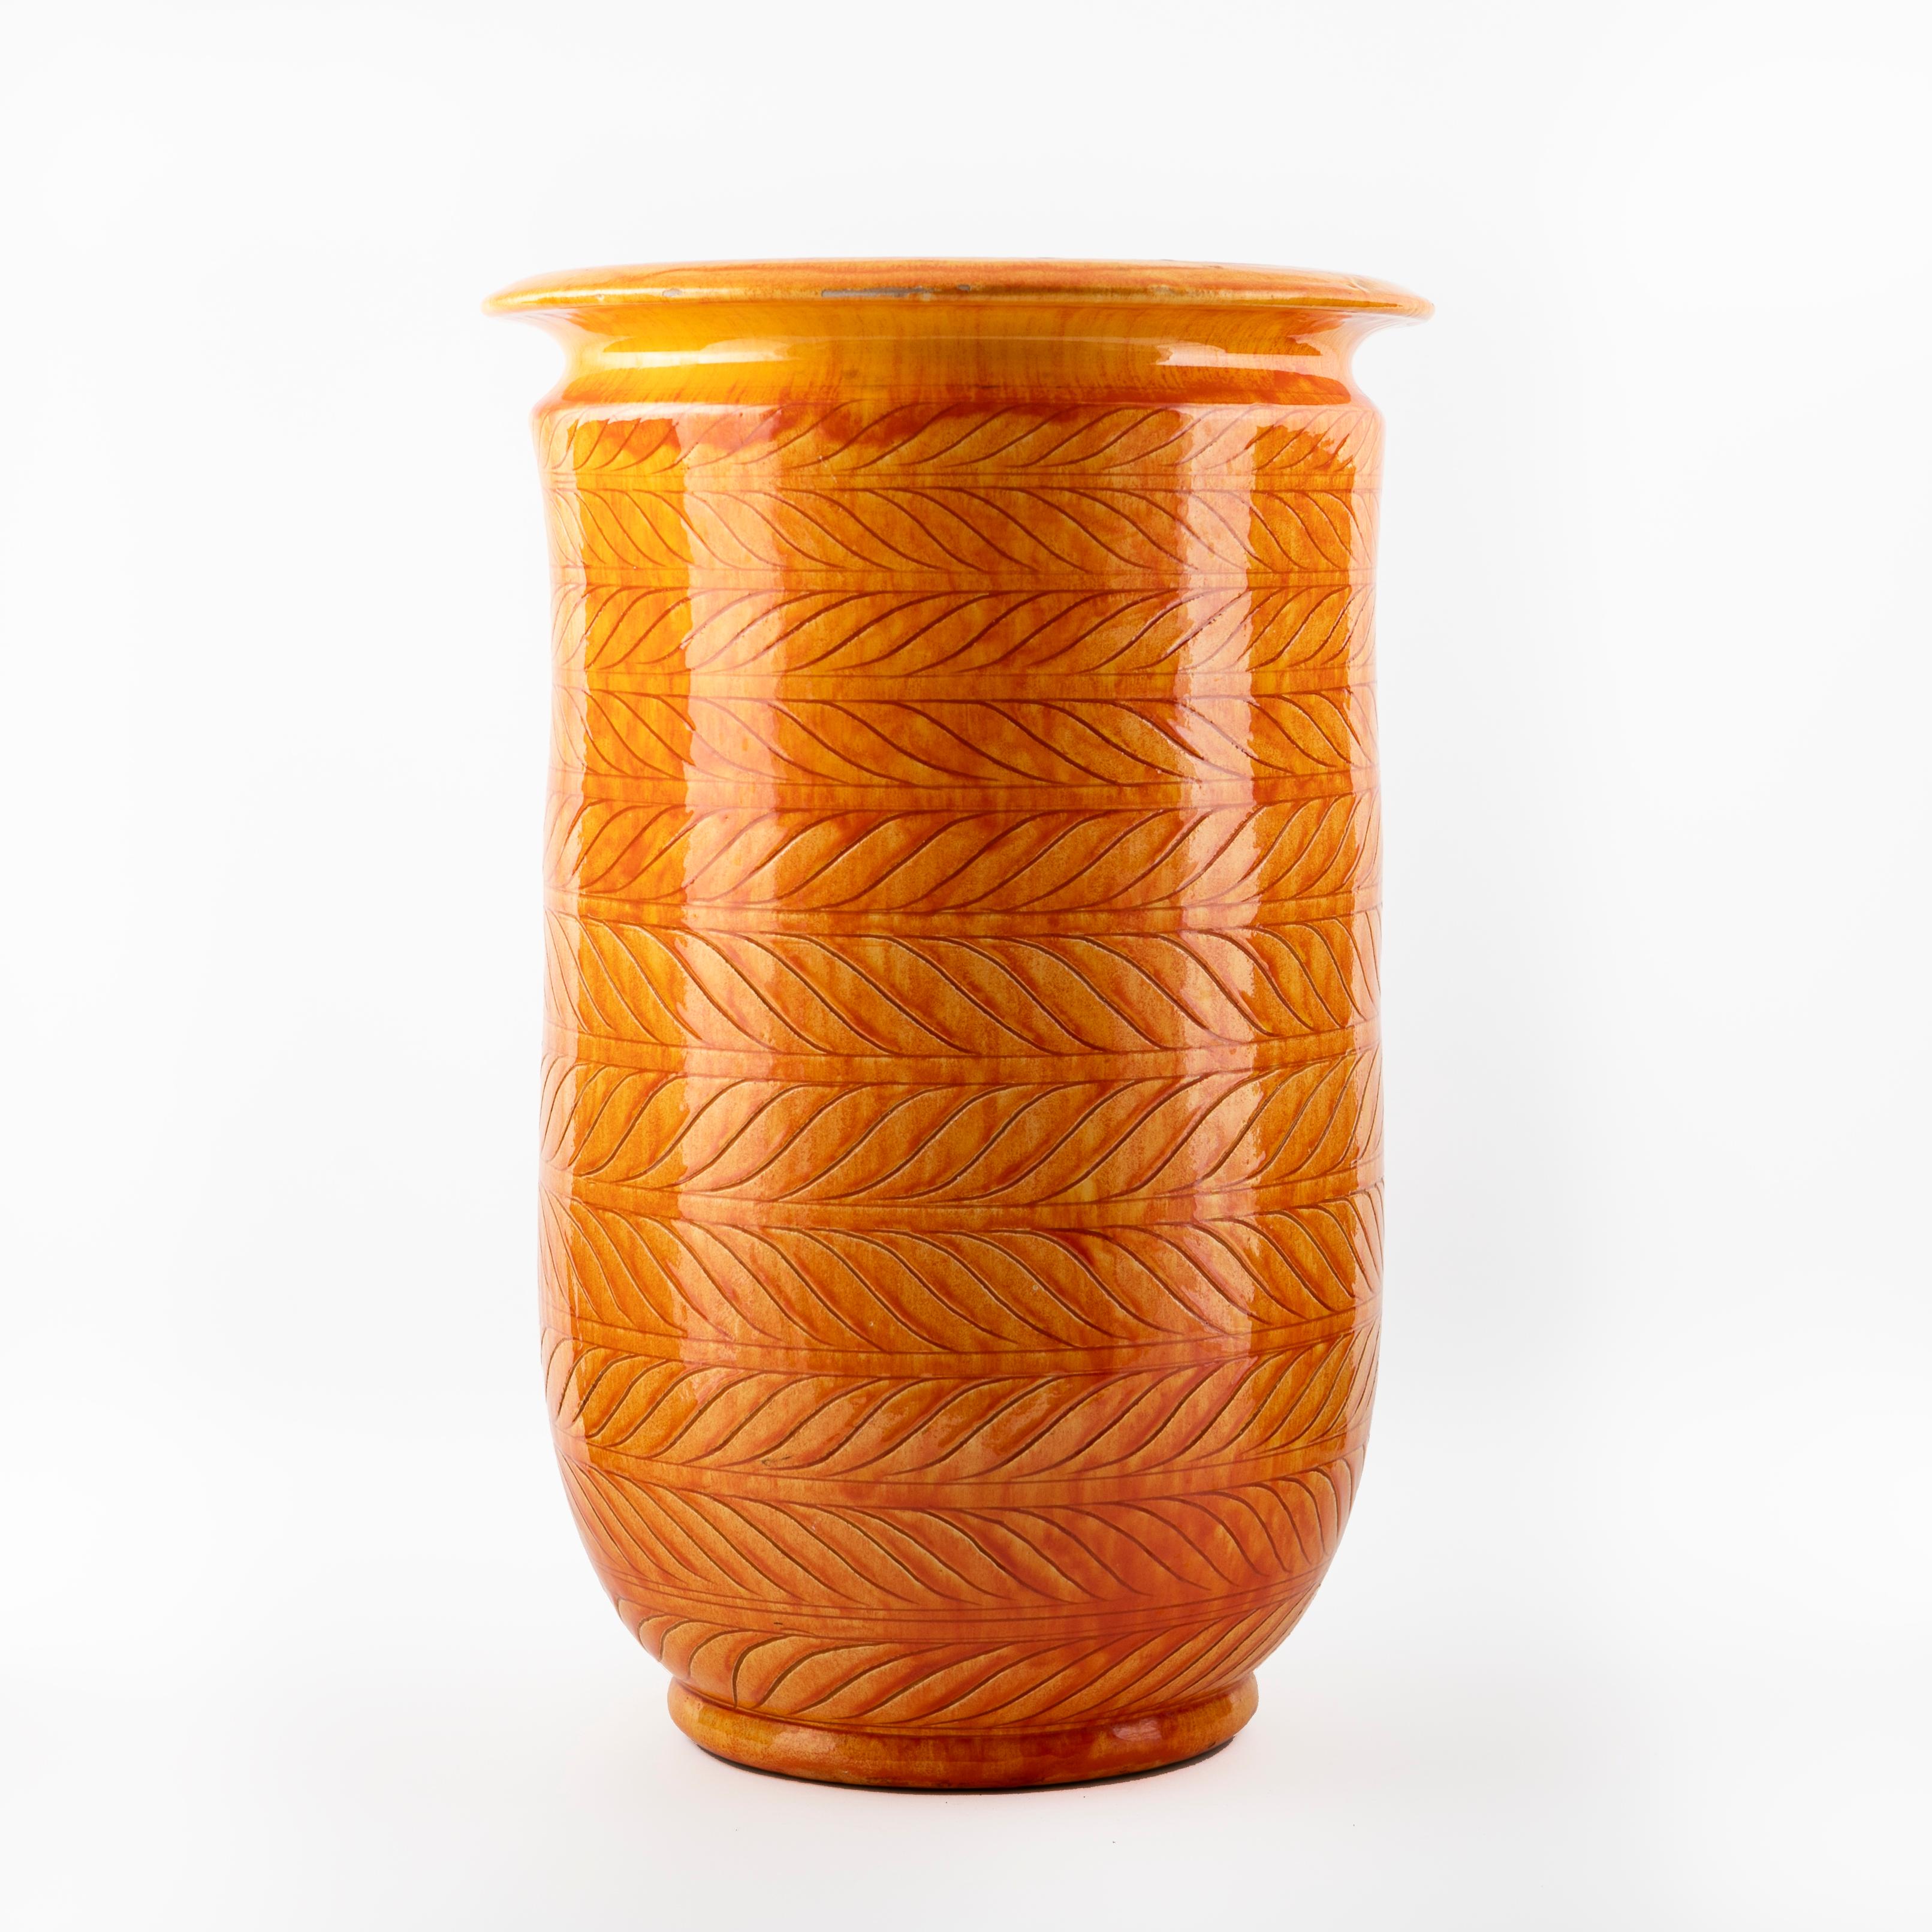 Large one-of-a-kind stoneware floor vase of tall cylindrical shape by Svend Hammershøi for Kähler. H: 48 cm.
Beautiful orange-yellow glaze. The body of the vase is decorated with a modern stylized leaf pattern.

A stunning vase in very good